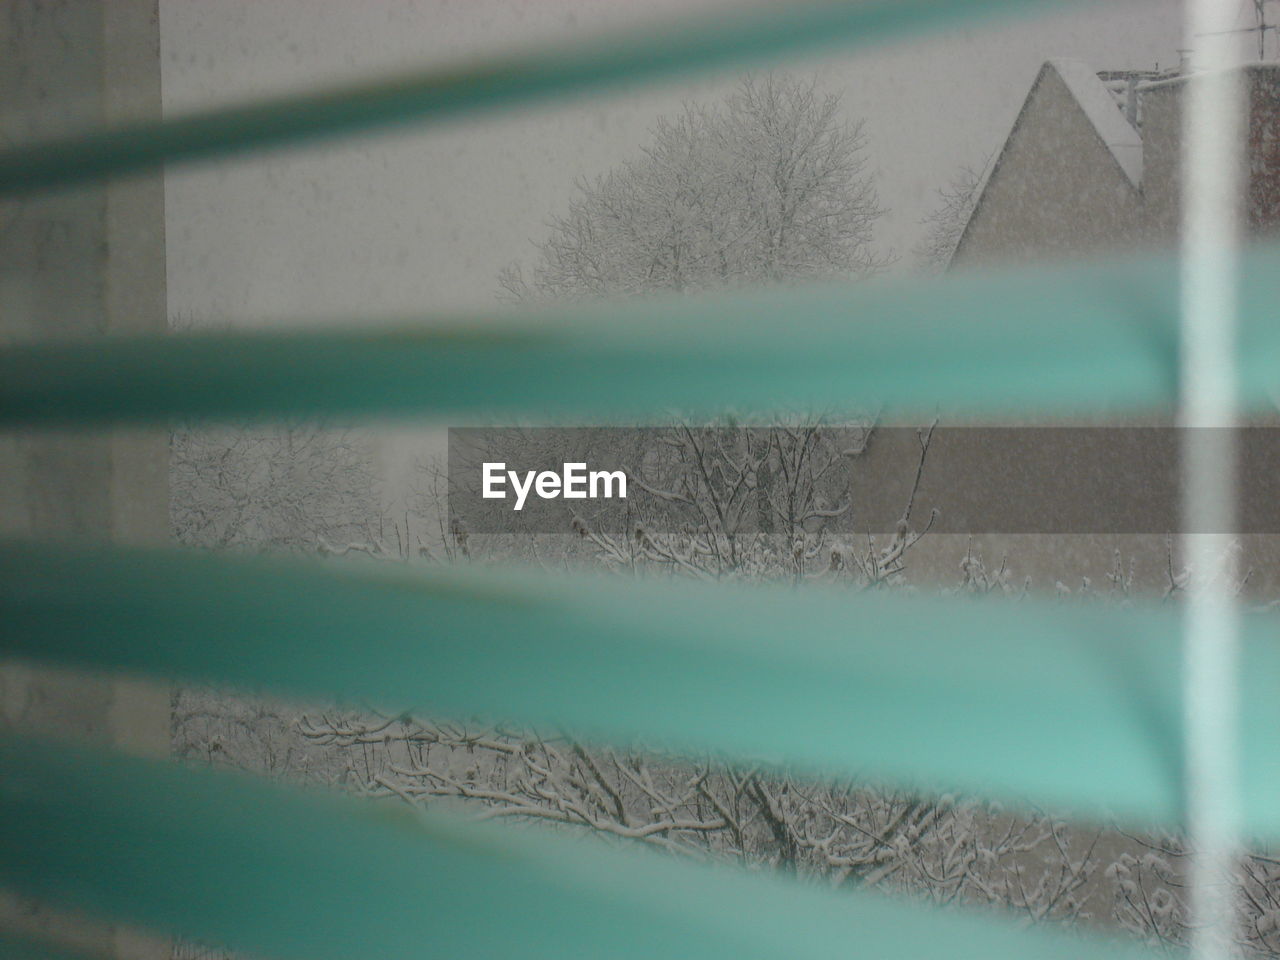 Bare trees during winter seen through blinds